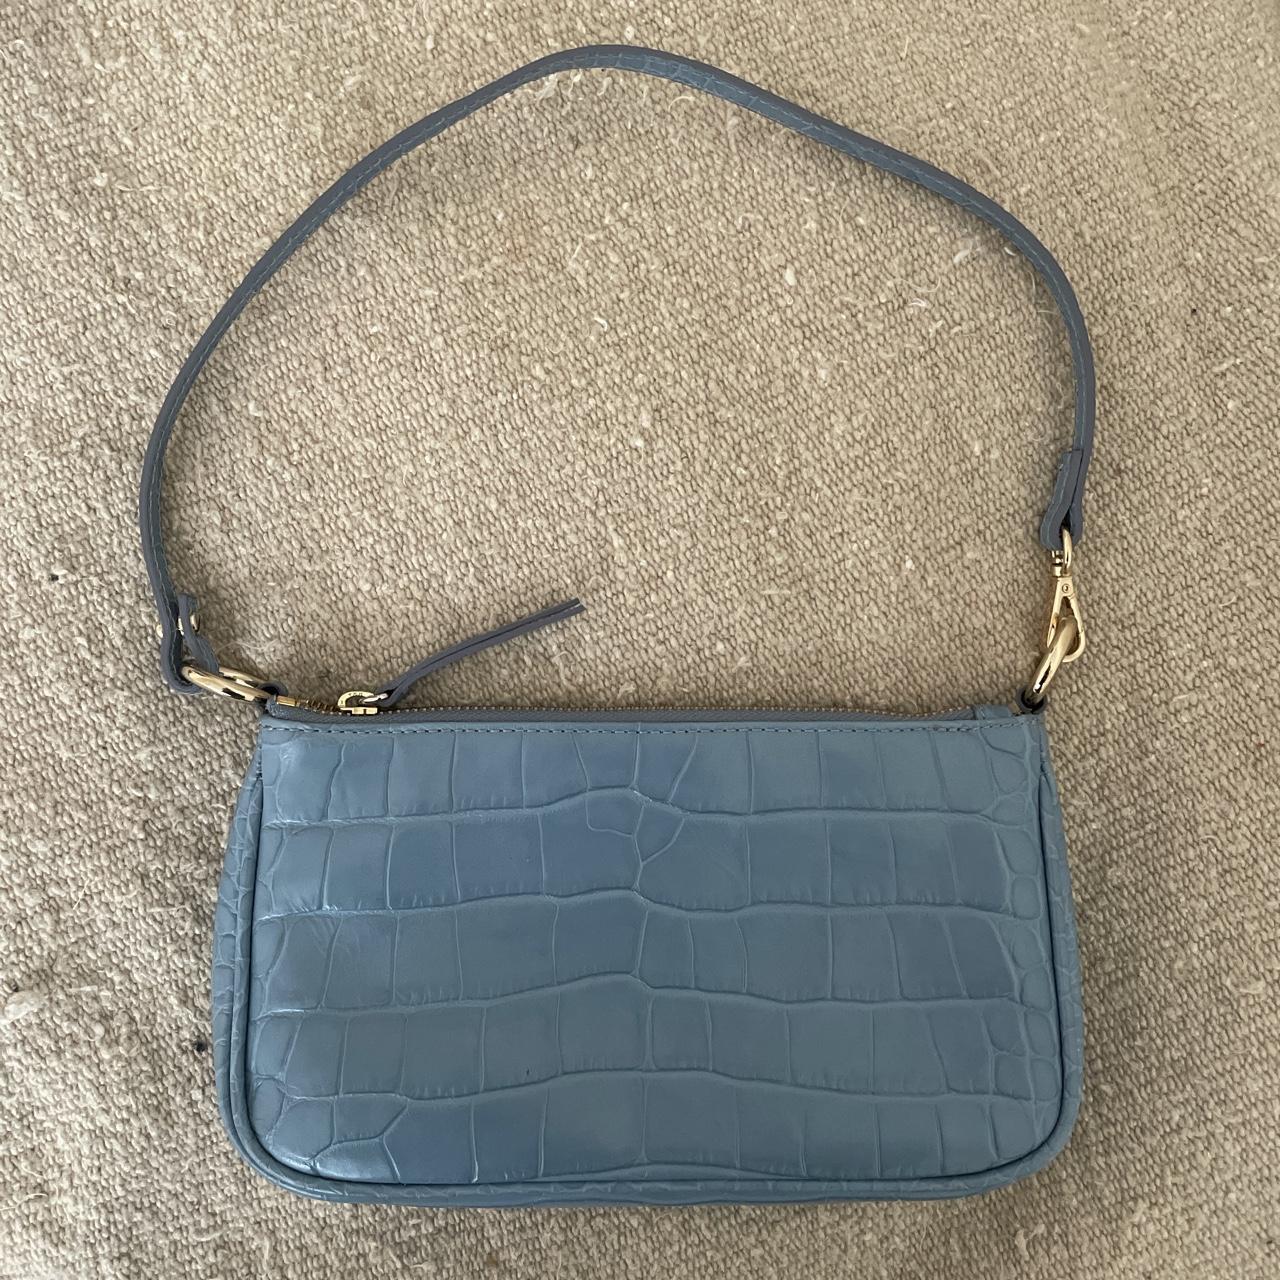 & other stories leather croc embossed baby blue mini... - Depop